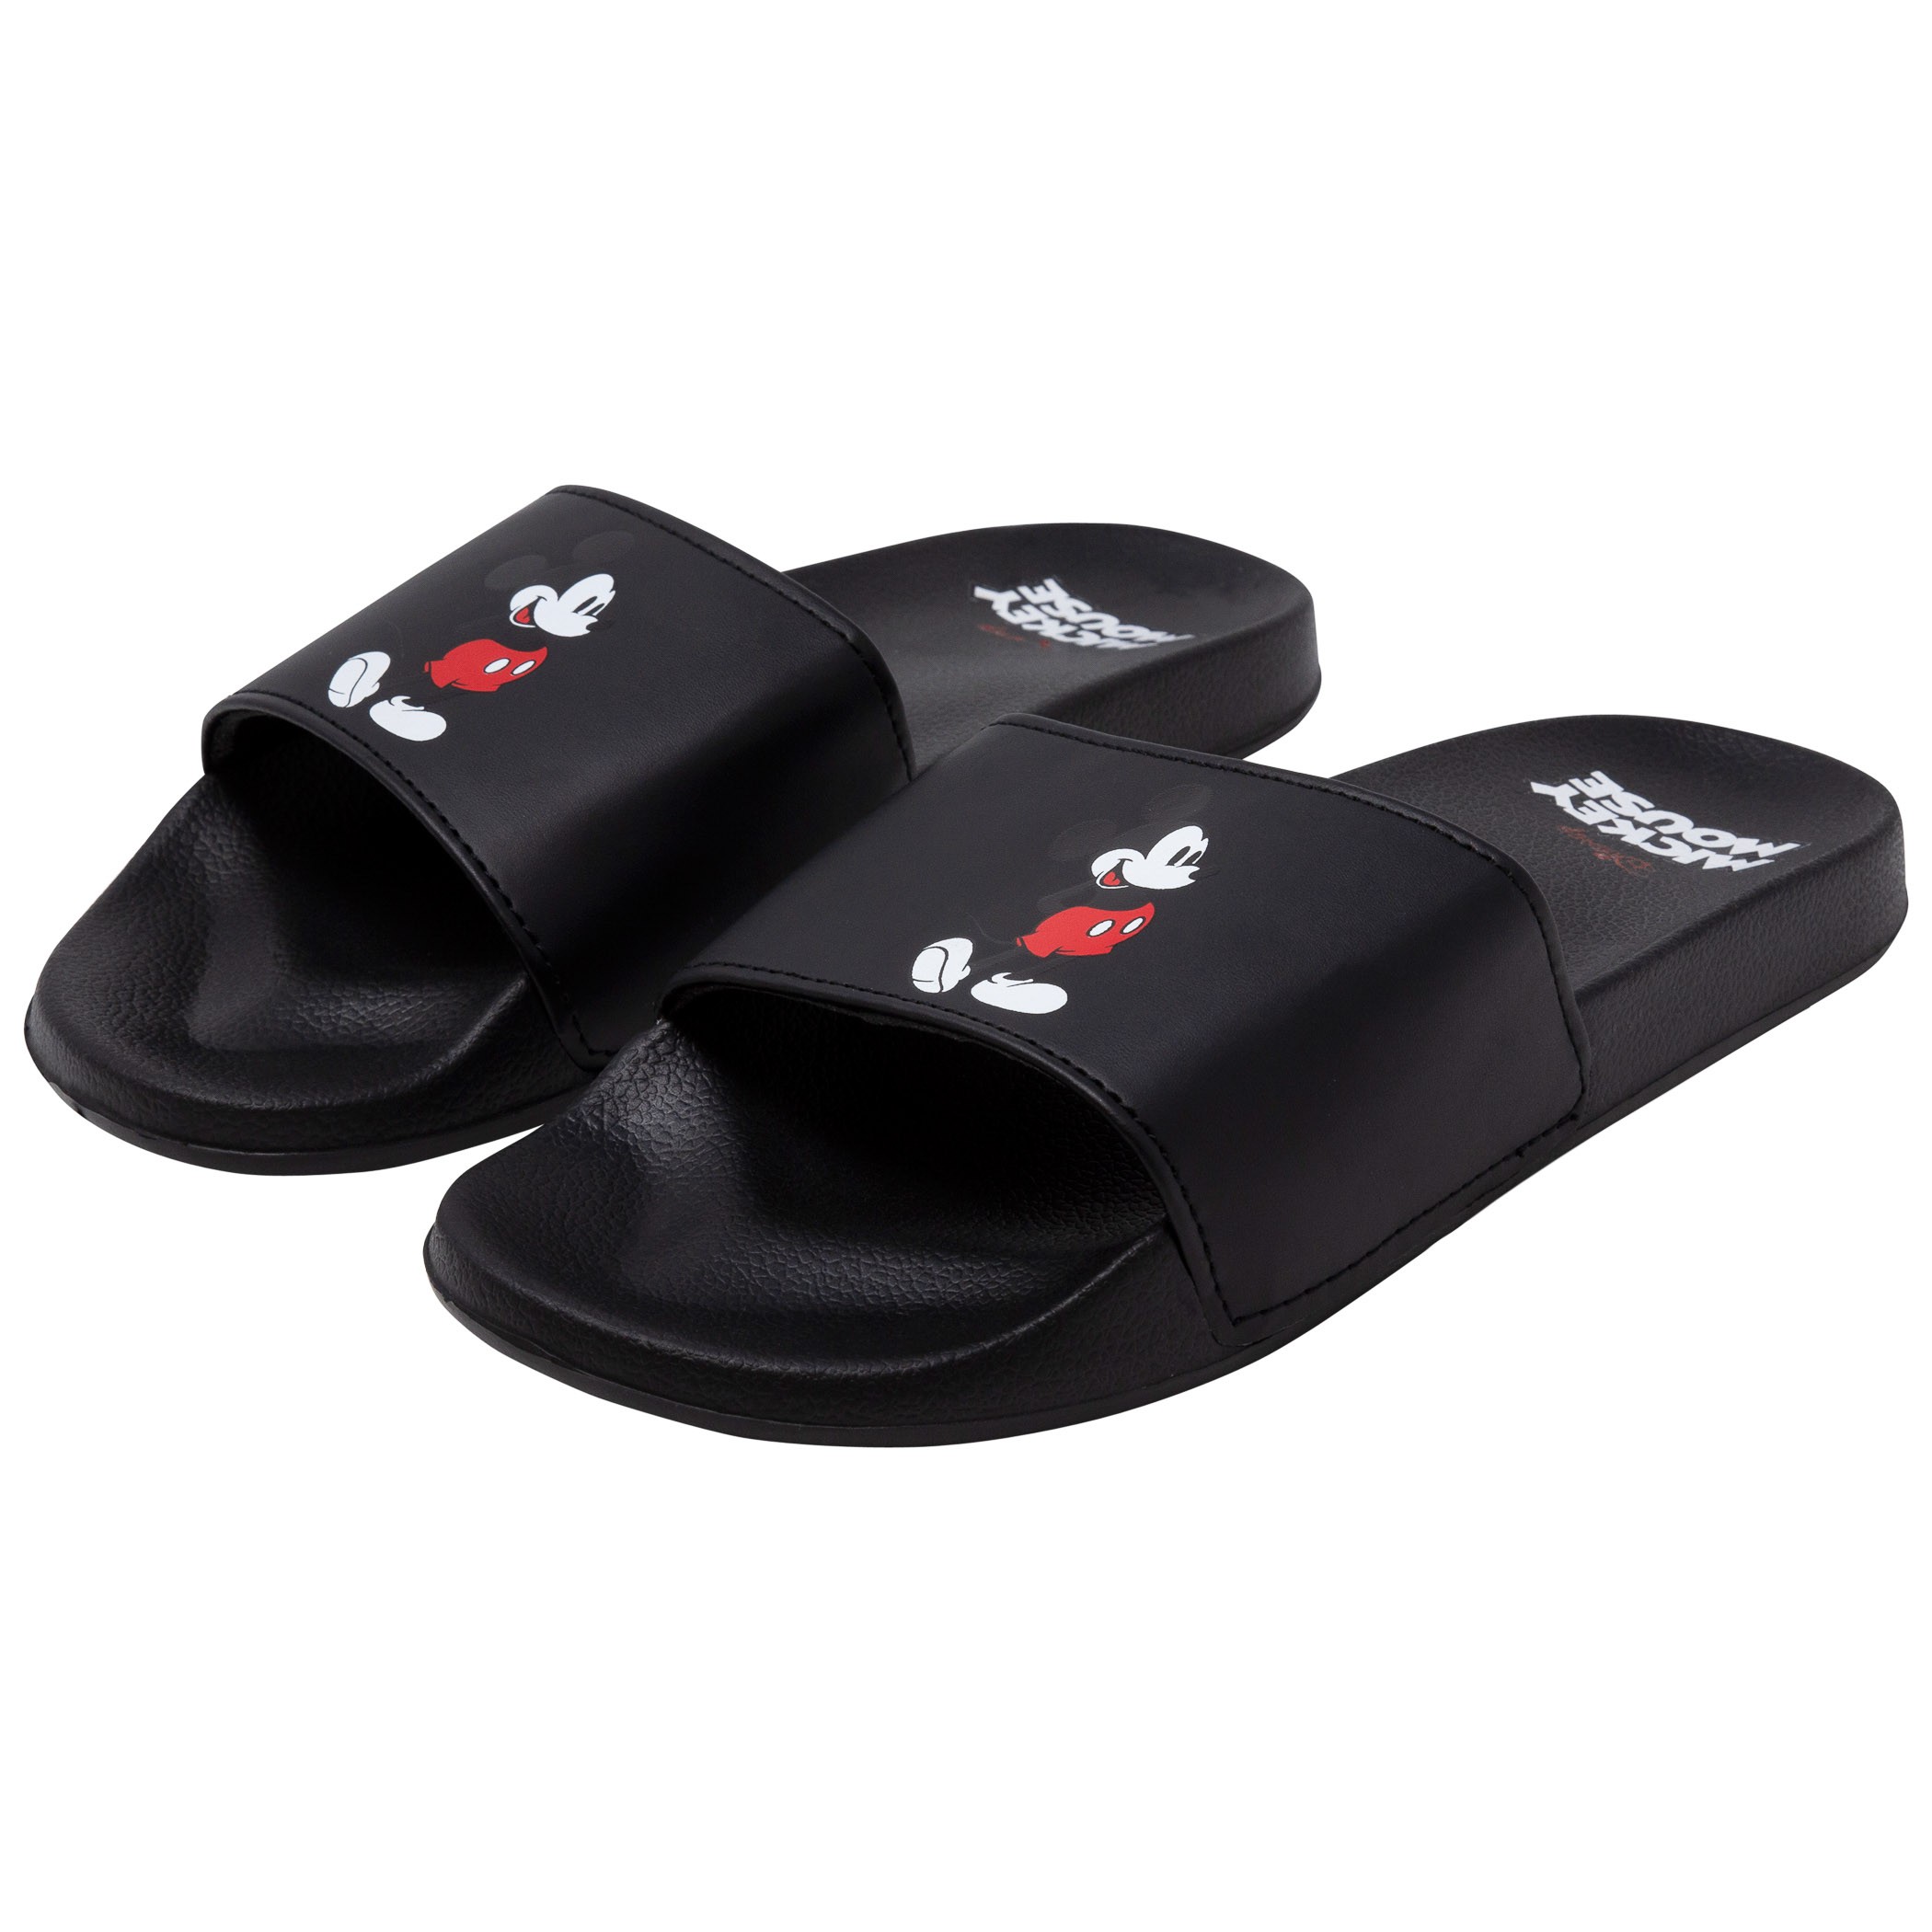  Mickey  Mouse  Slip On Black Sandals 